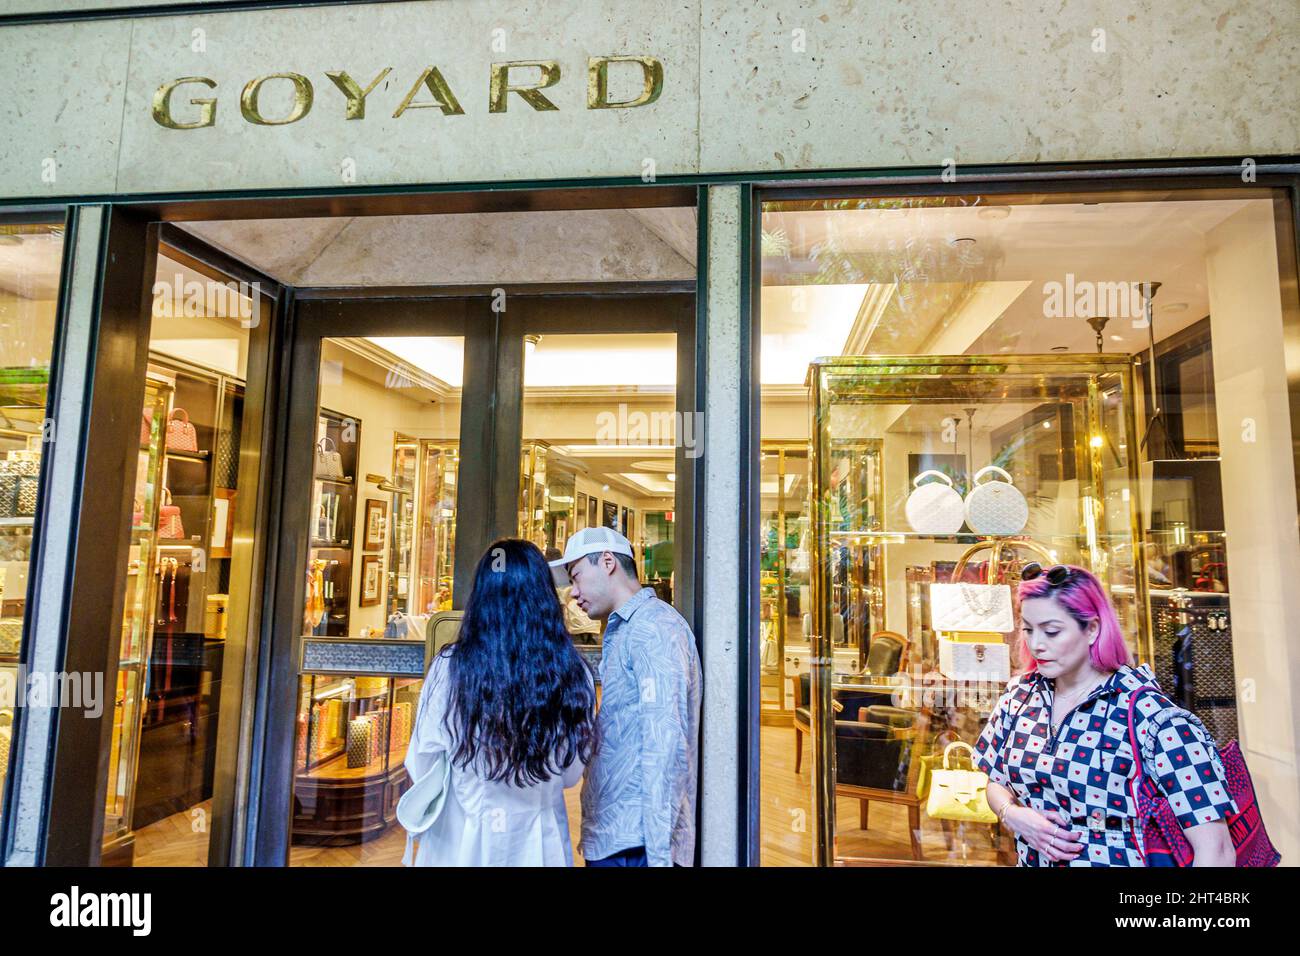 Goyard Cut Out Stock Images & Pictures - Alamy